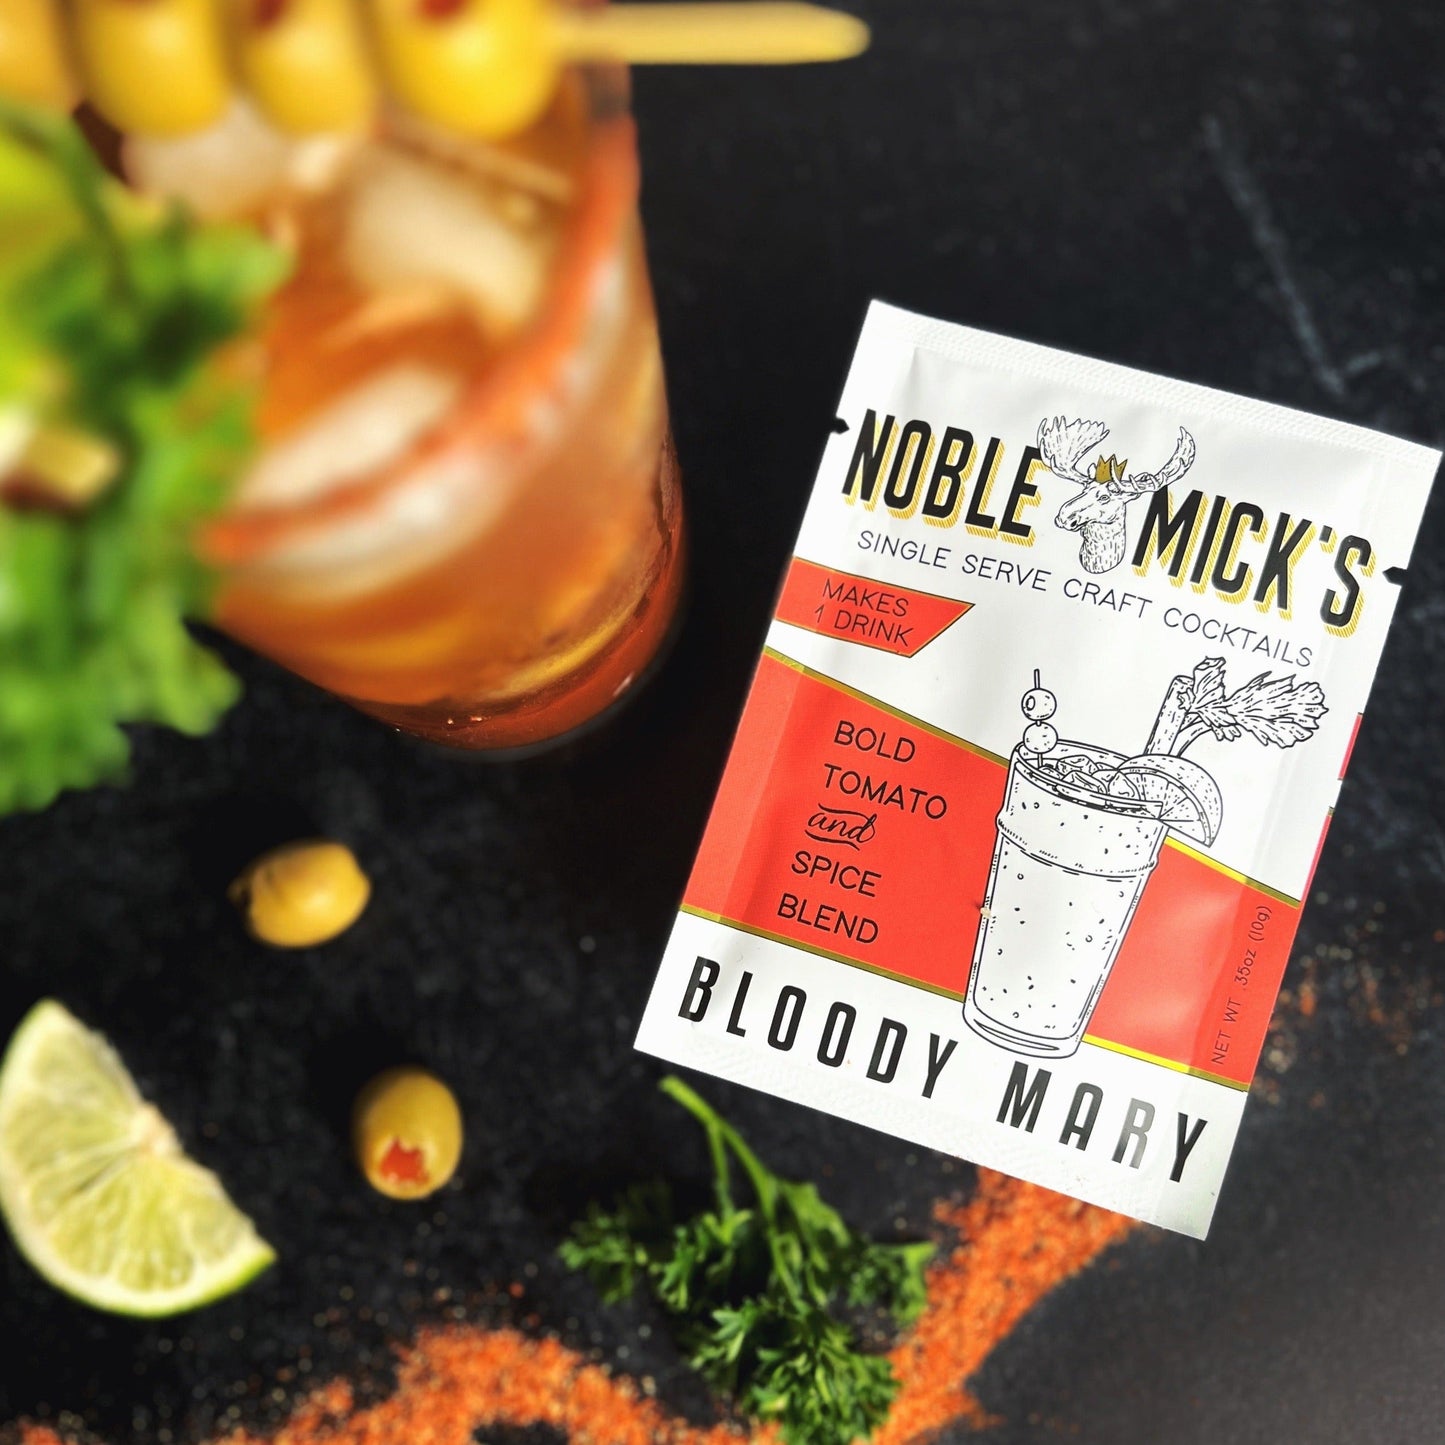 Bloody Mary (48-pack)